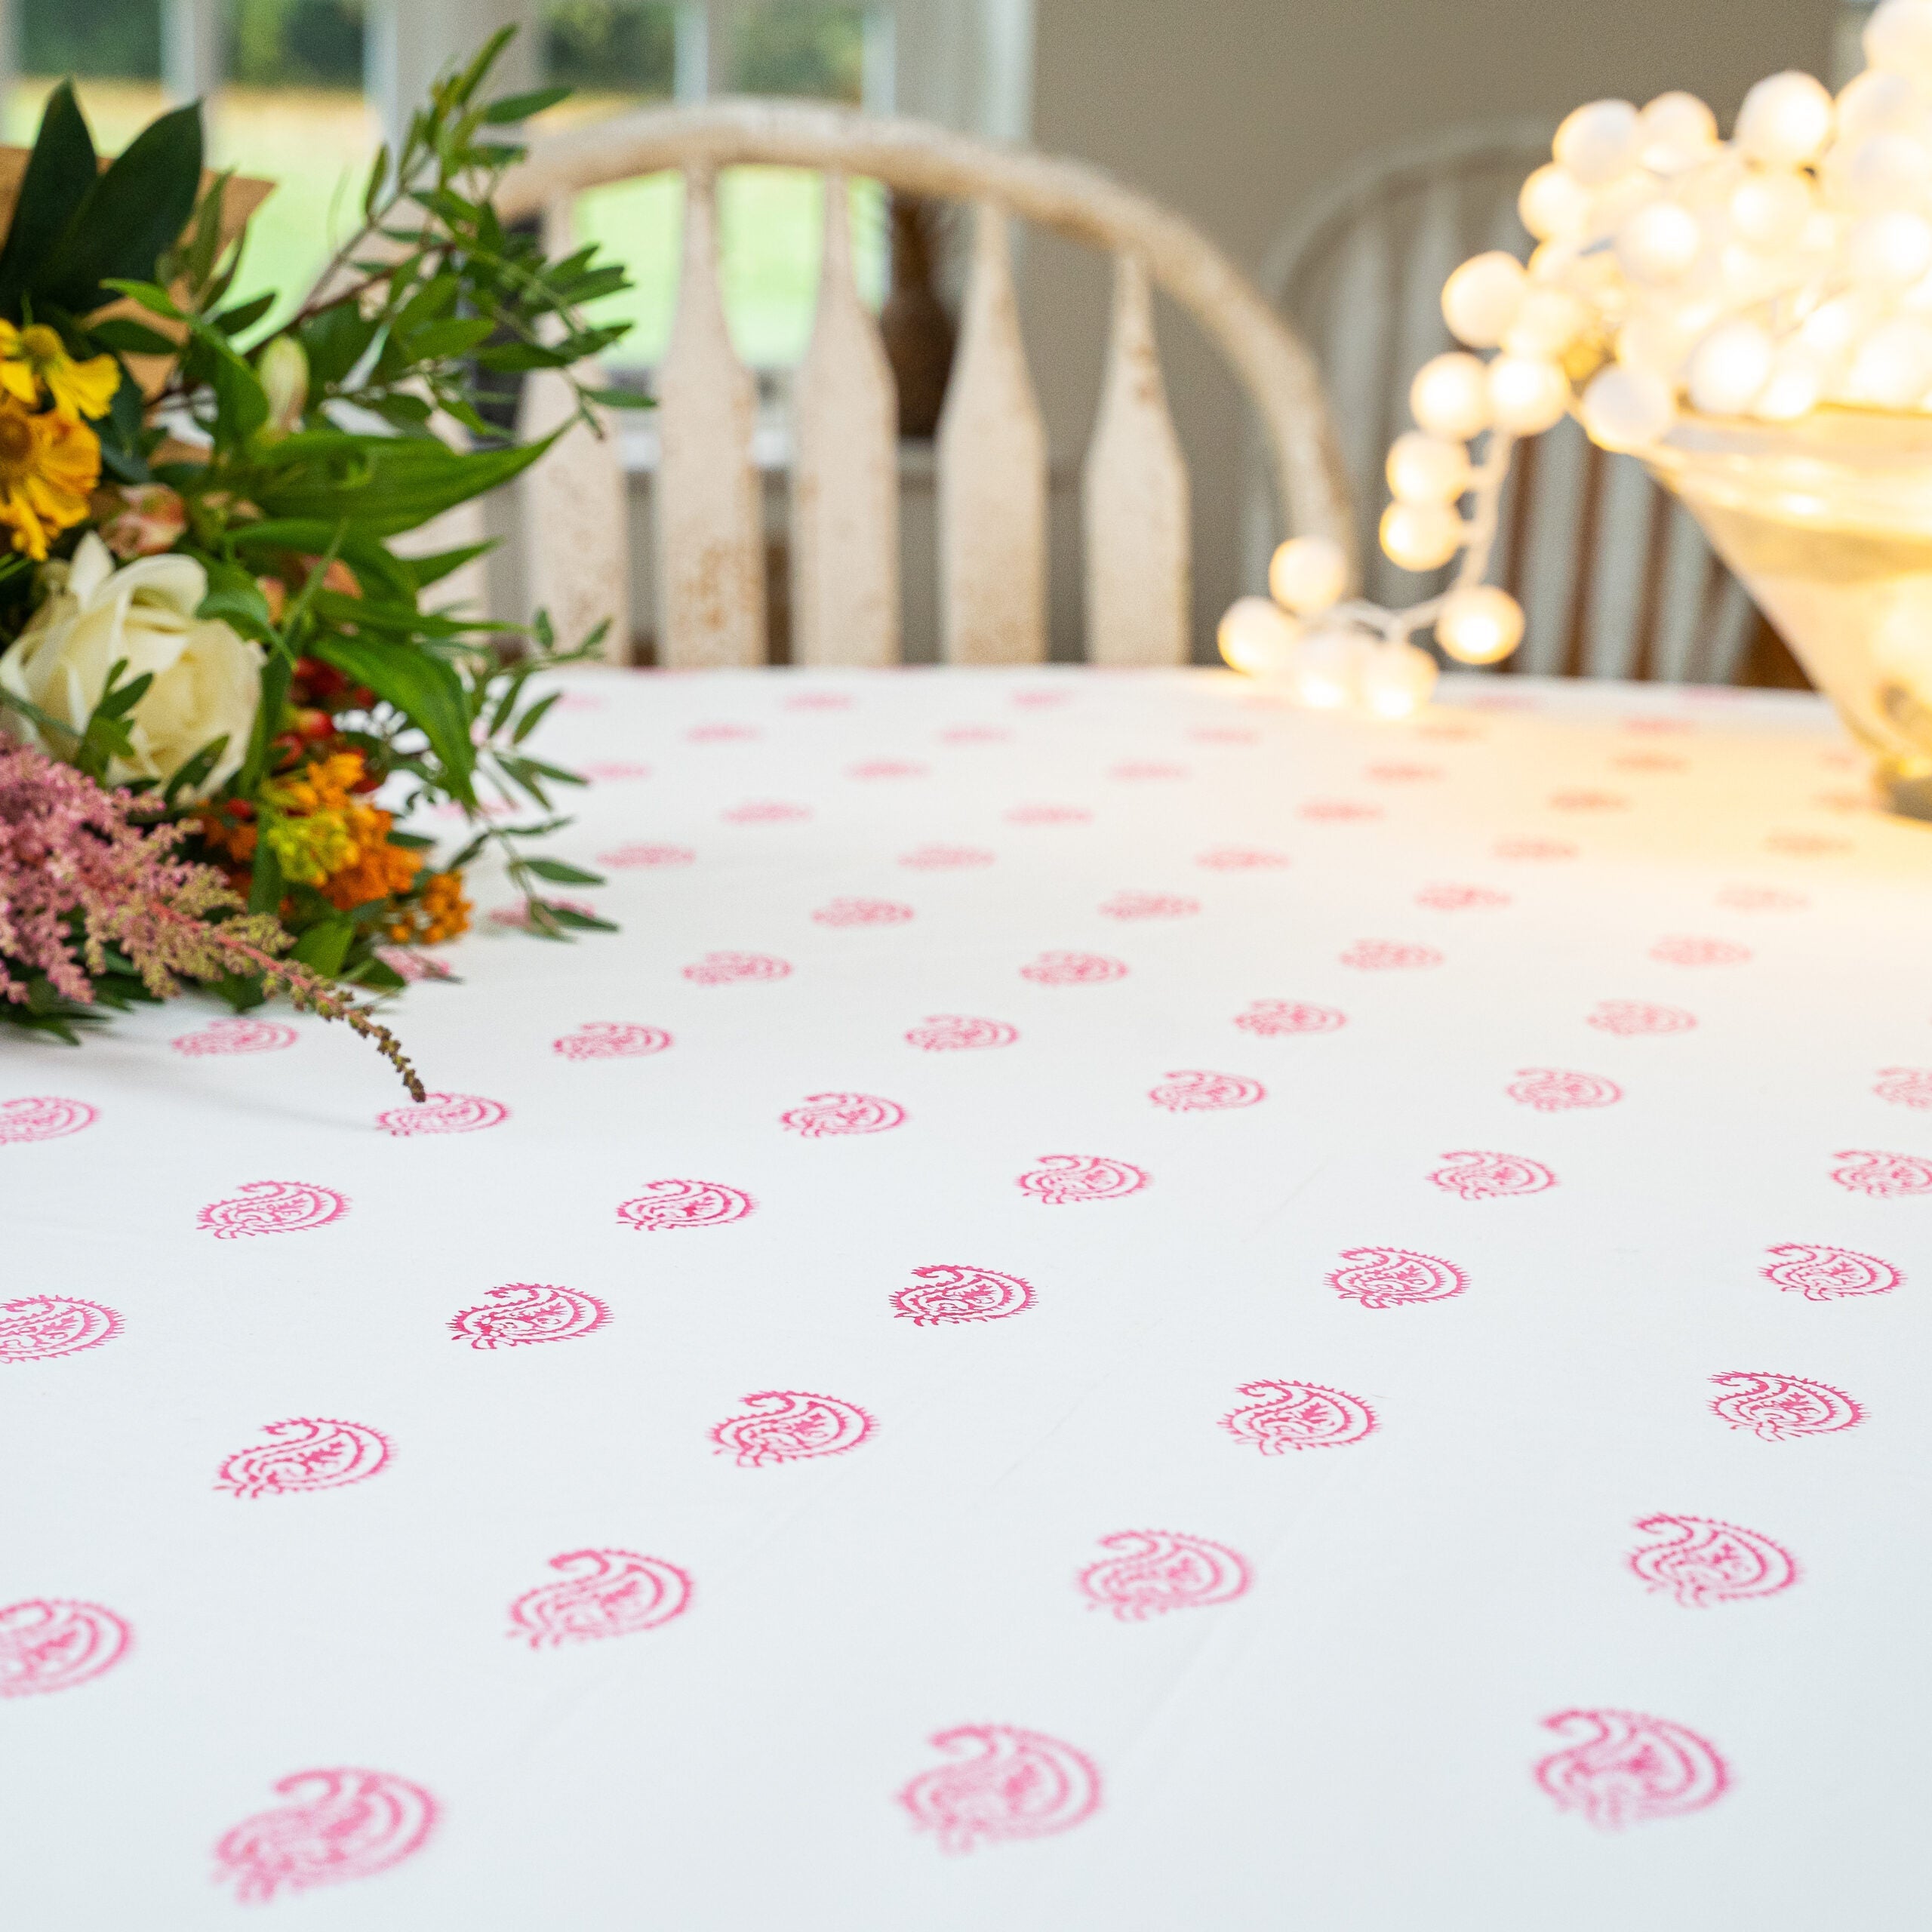 tablecloths-lifestyle-full-size-25-scaled.jpg